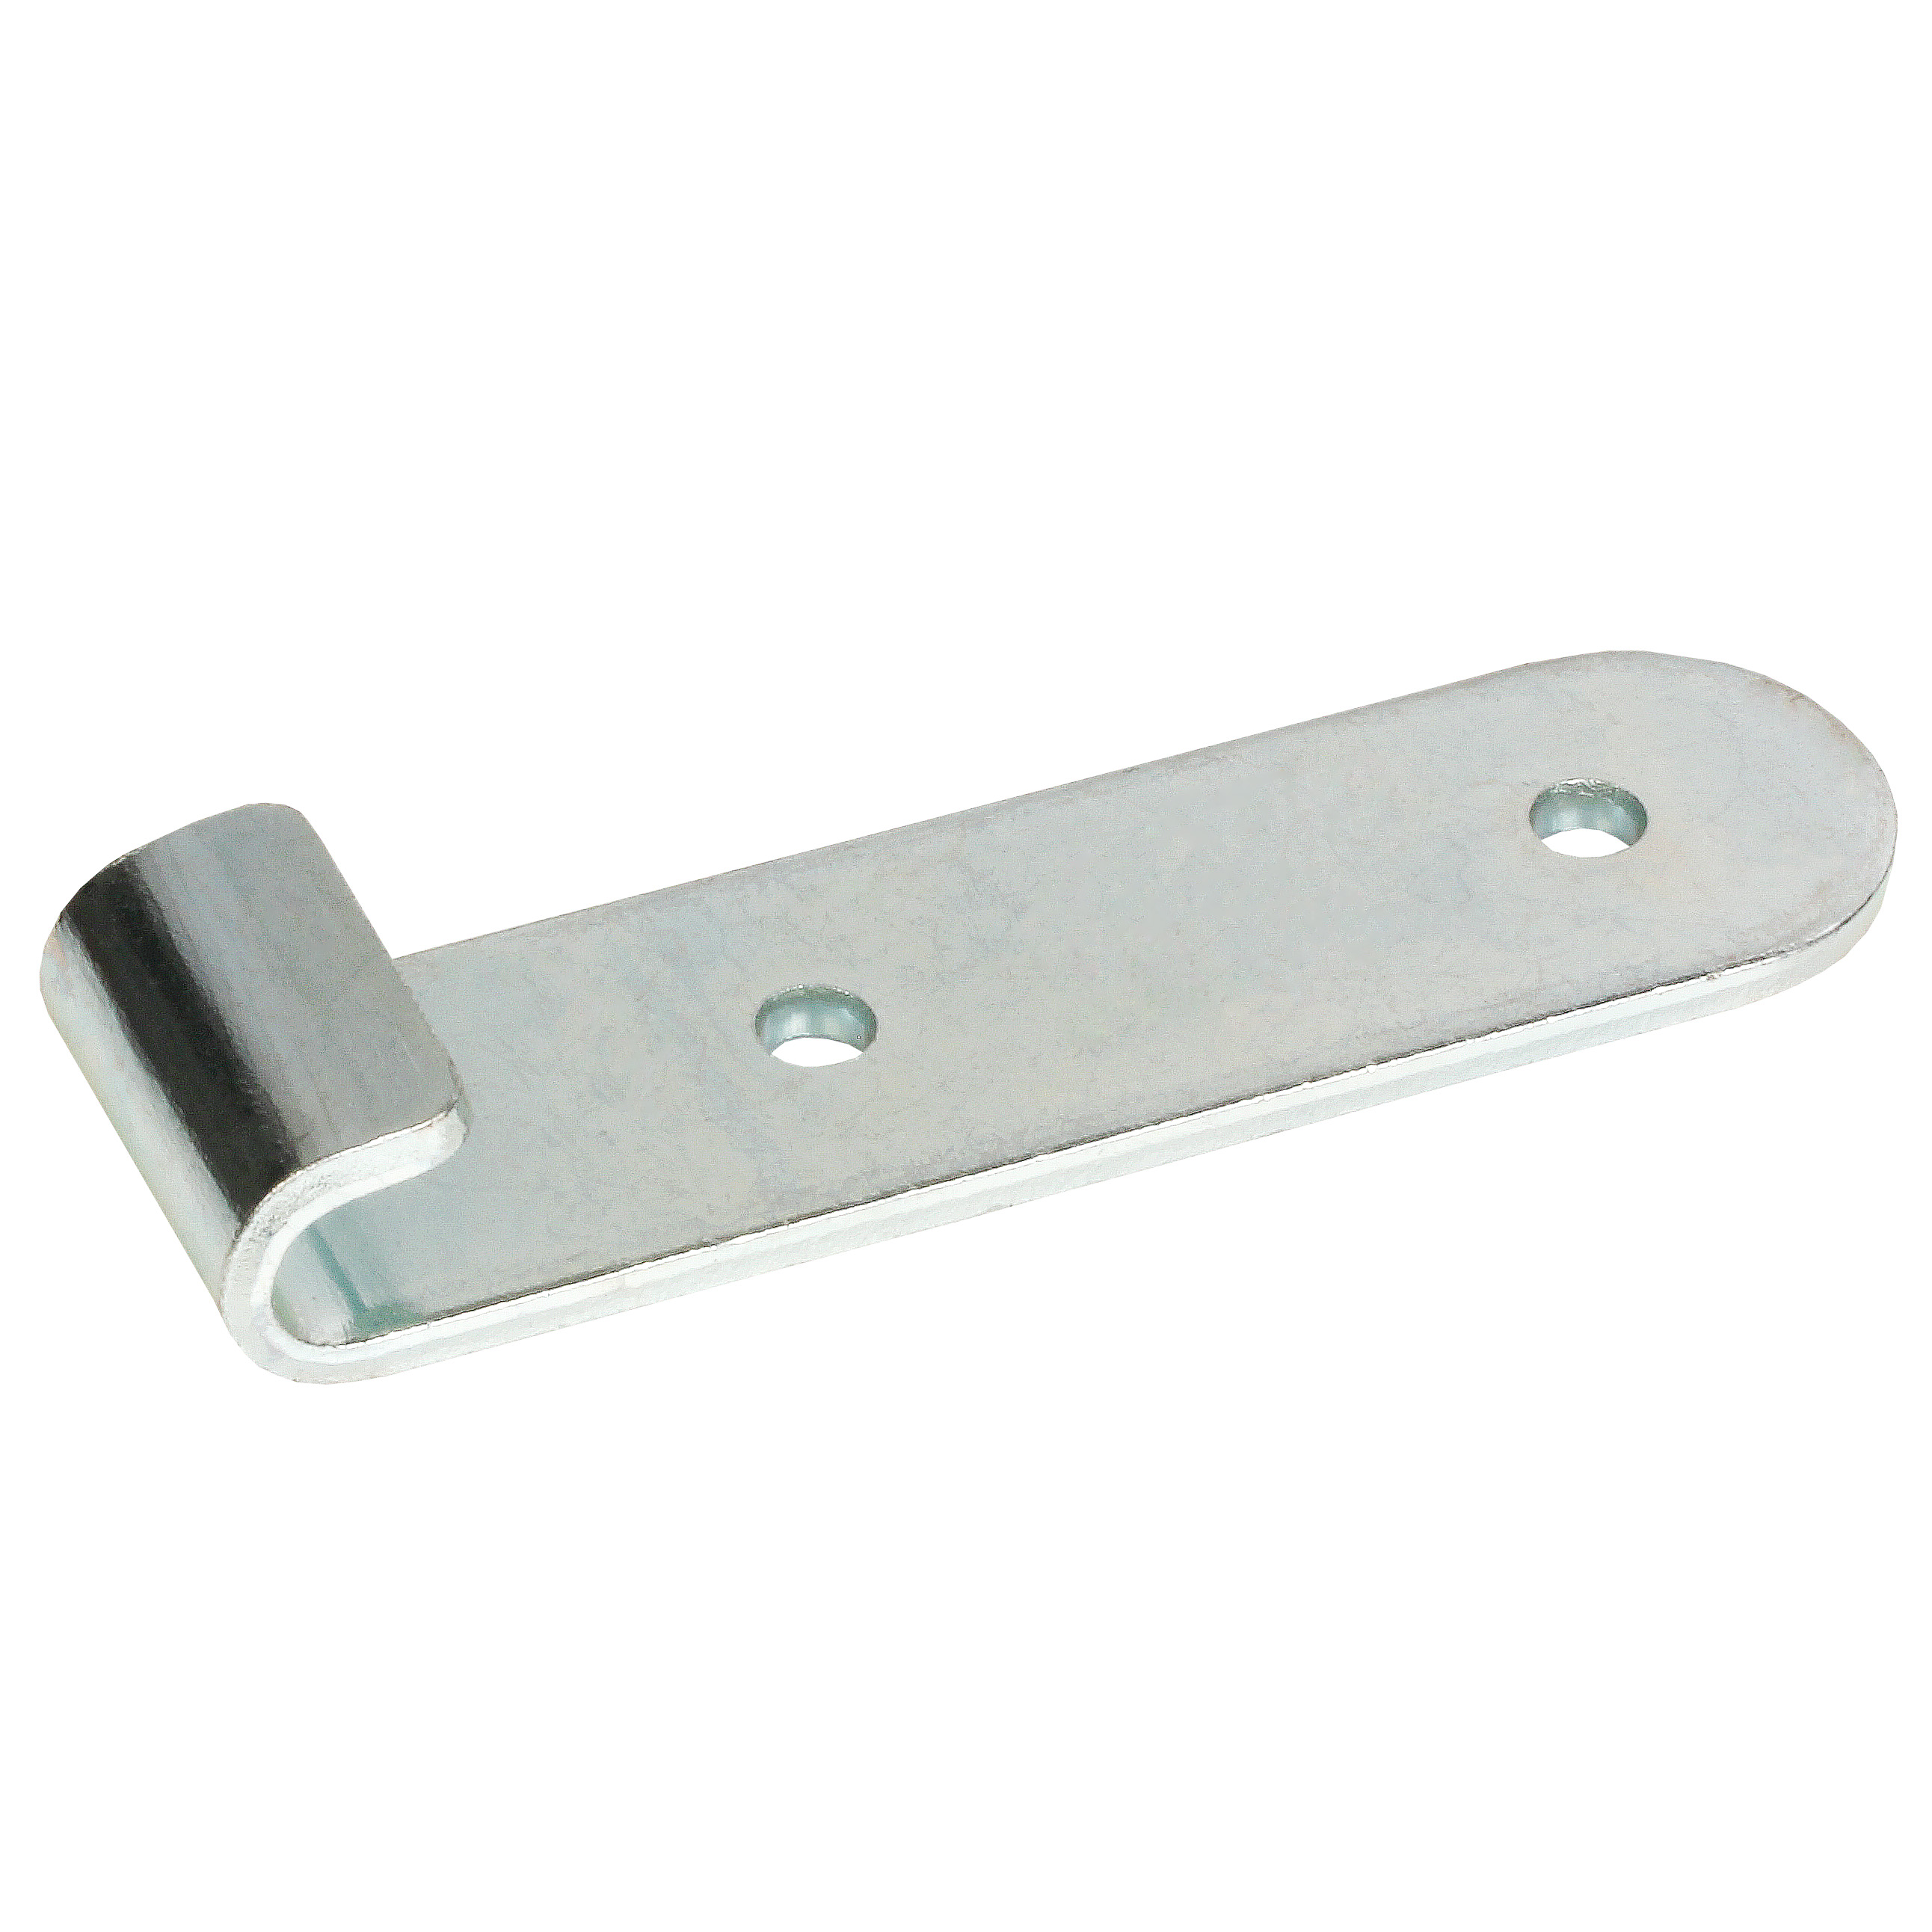 Catch plate for toggle latch - 25.5mm - Steel - Flat